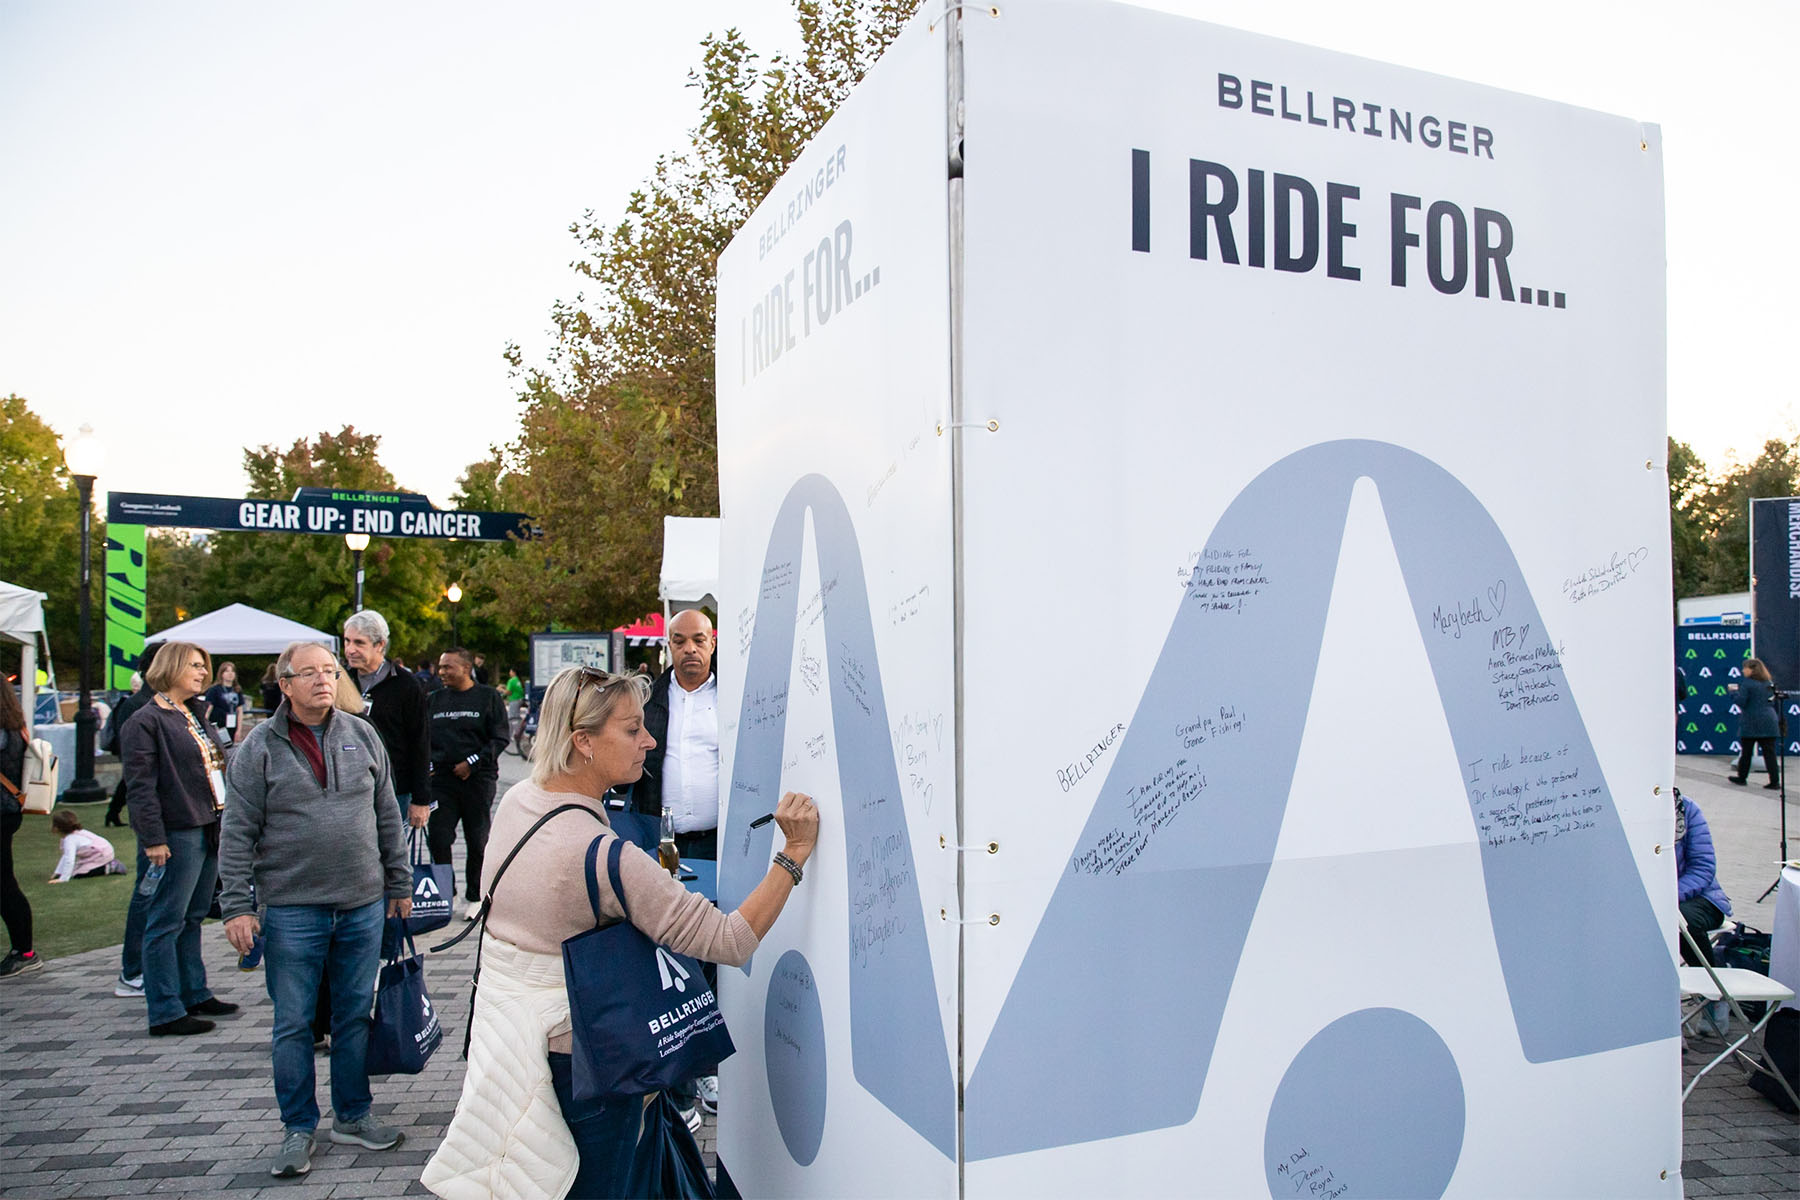 BellRinger rider writing why she rides